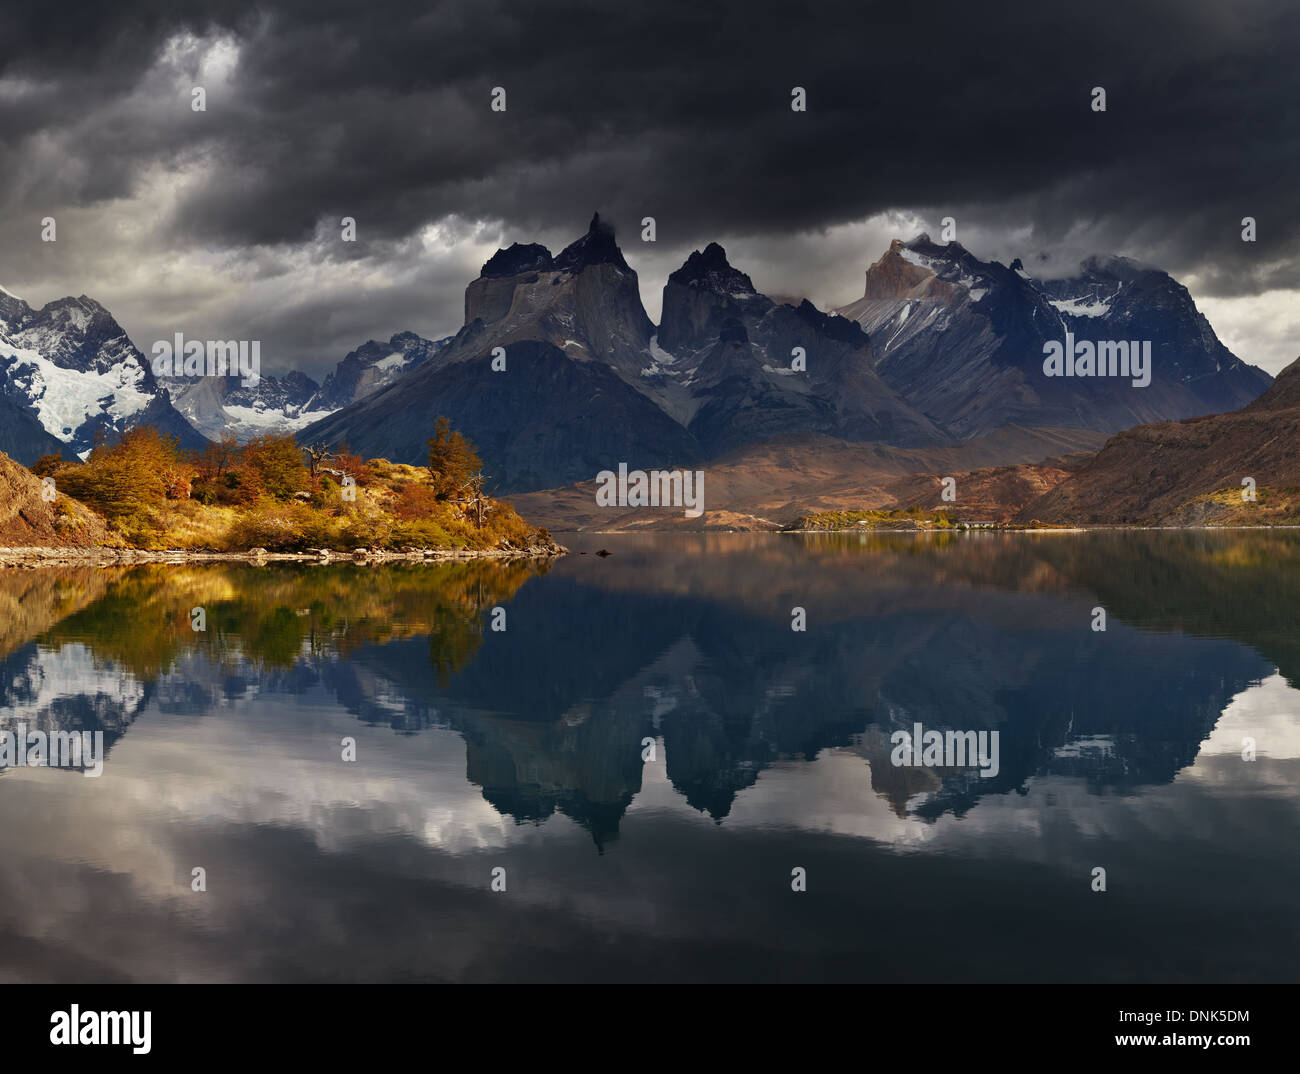 Sunrise in Torres del Paine National Park, Lake Pehoe and Cuernos mountains, Patagonia, Chile Stock Photo